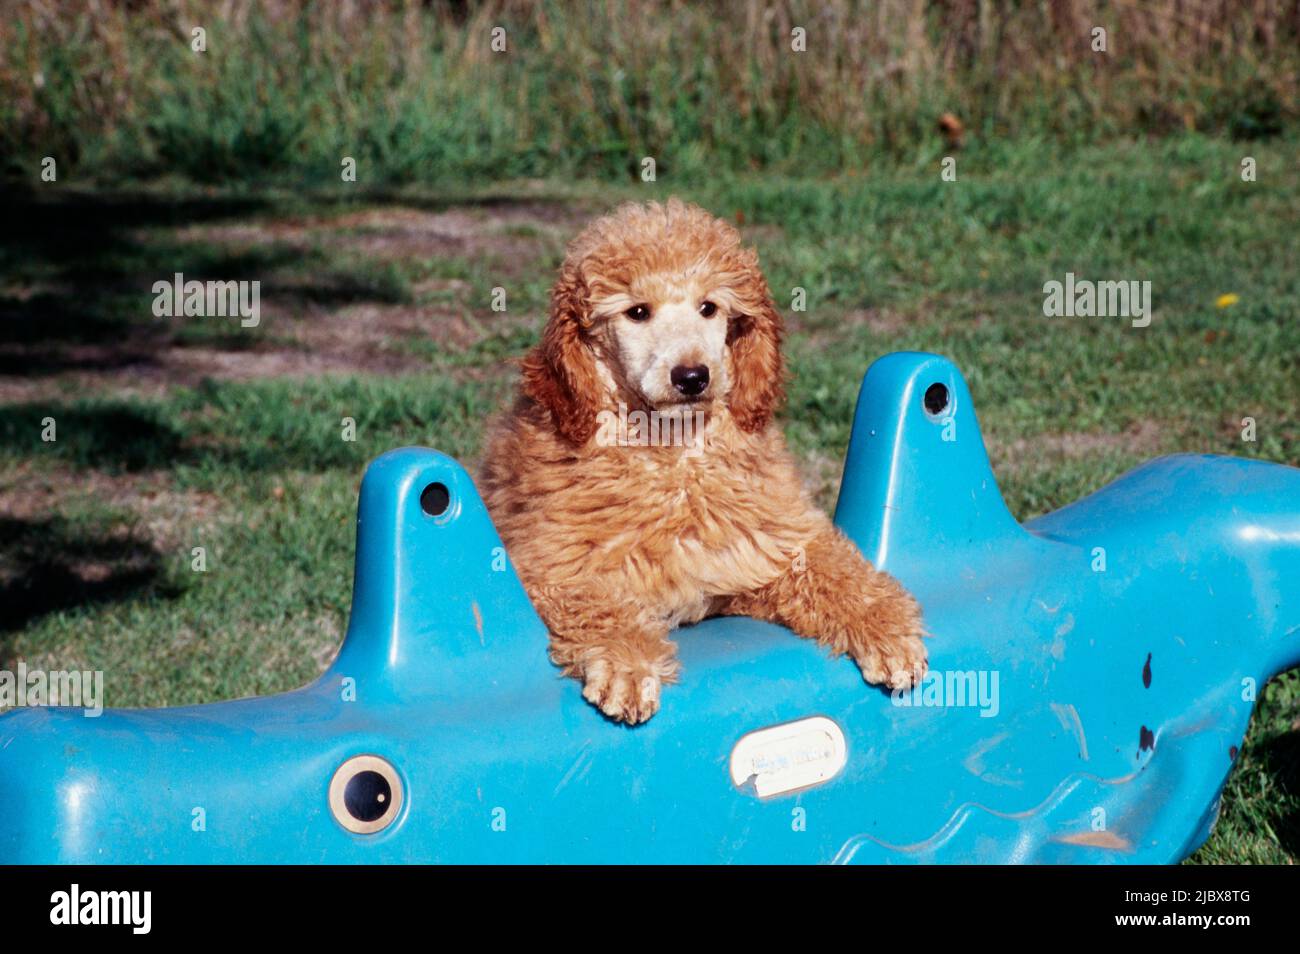 A standard poodle puppy resting its paws on a blue toy Stock Photo